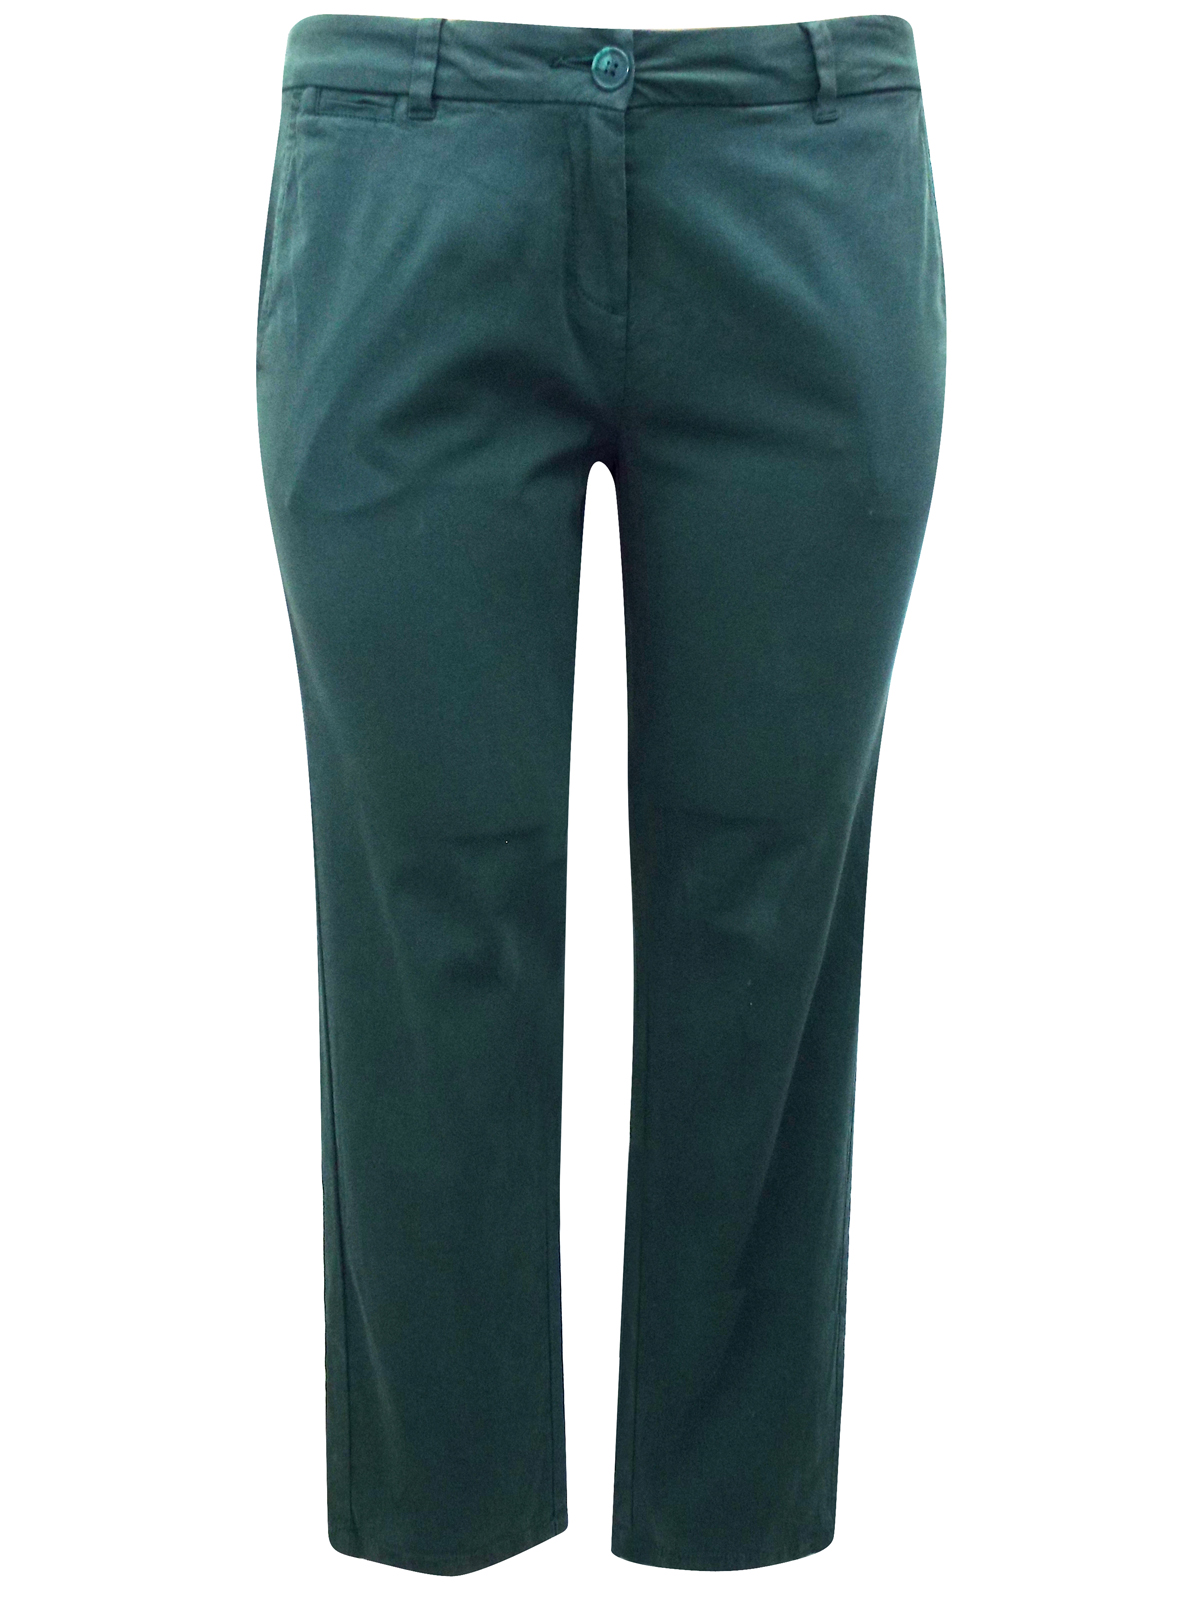 Marks and Spencer - - M&5 EVERGREEN Cotton Rich Straight Leg Chinos ...